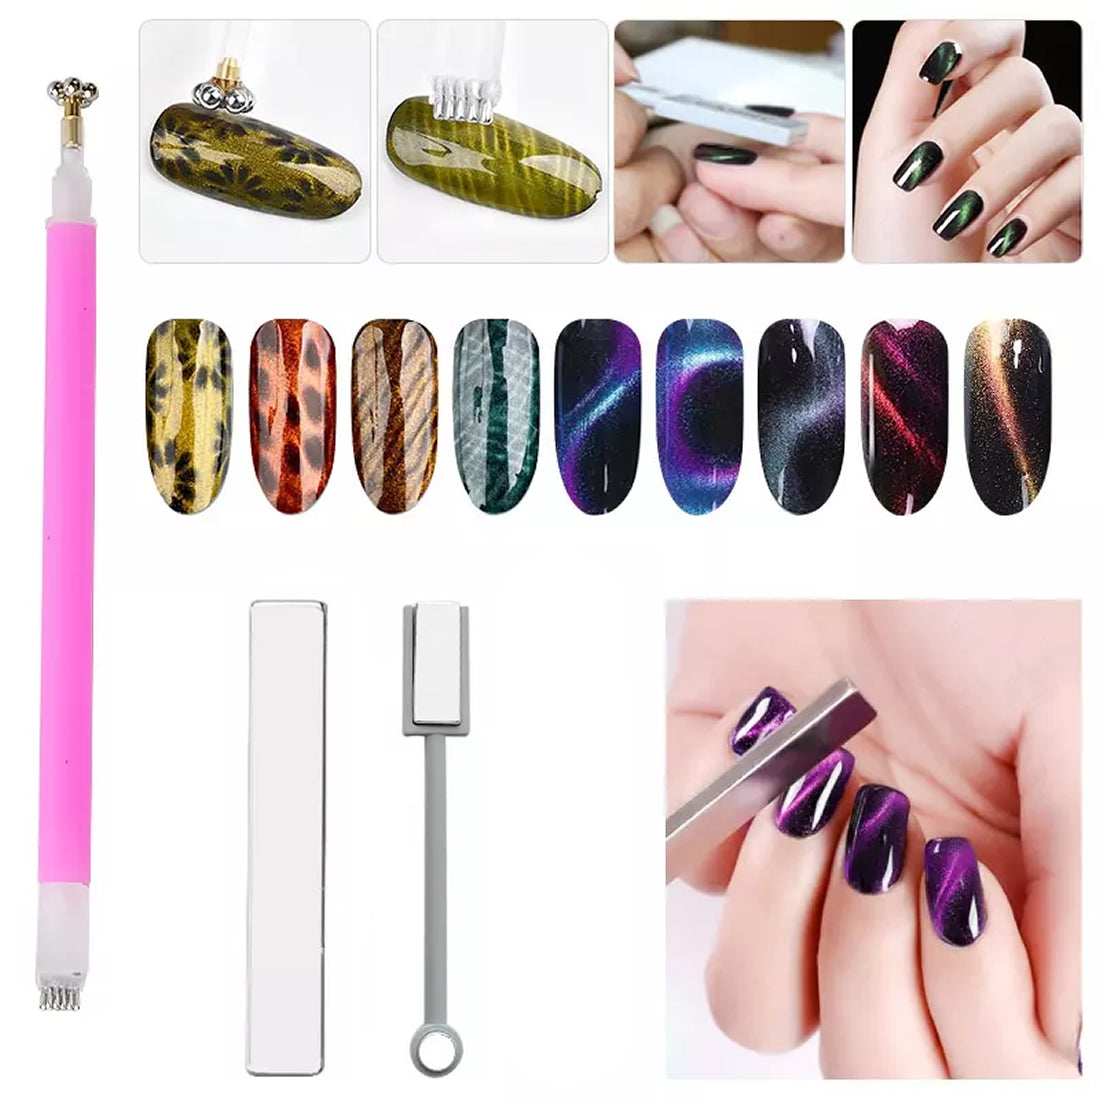 Buy FULINJOY 5PCS Dotting Pens with 3 PCS Nail Painting Brushes, Nail Art  Design Tools Online at Low Prices in India - Amazon.in